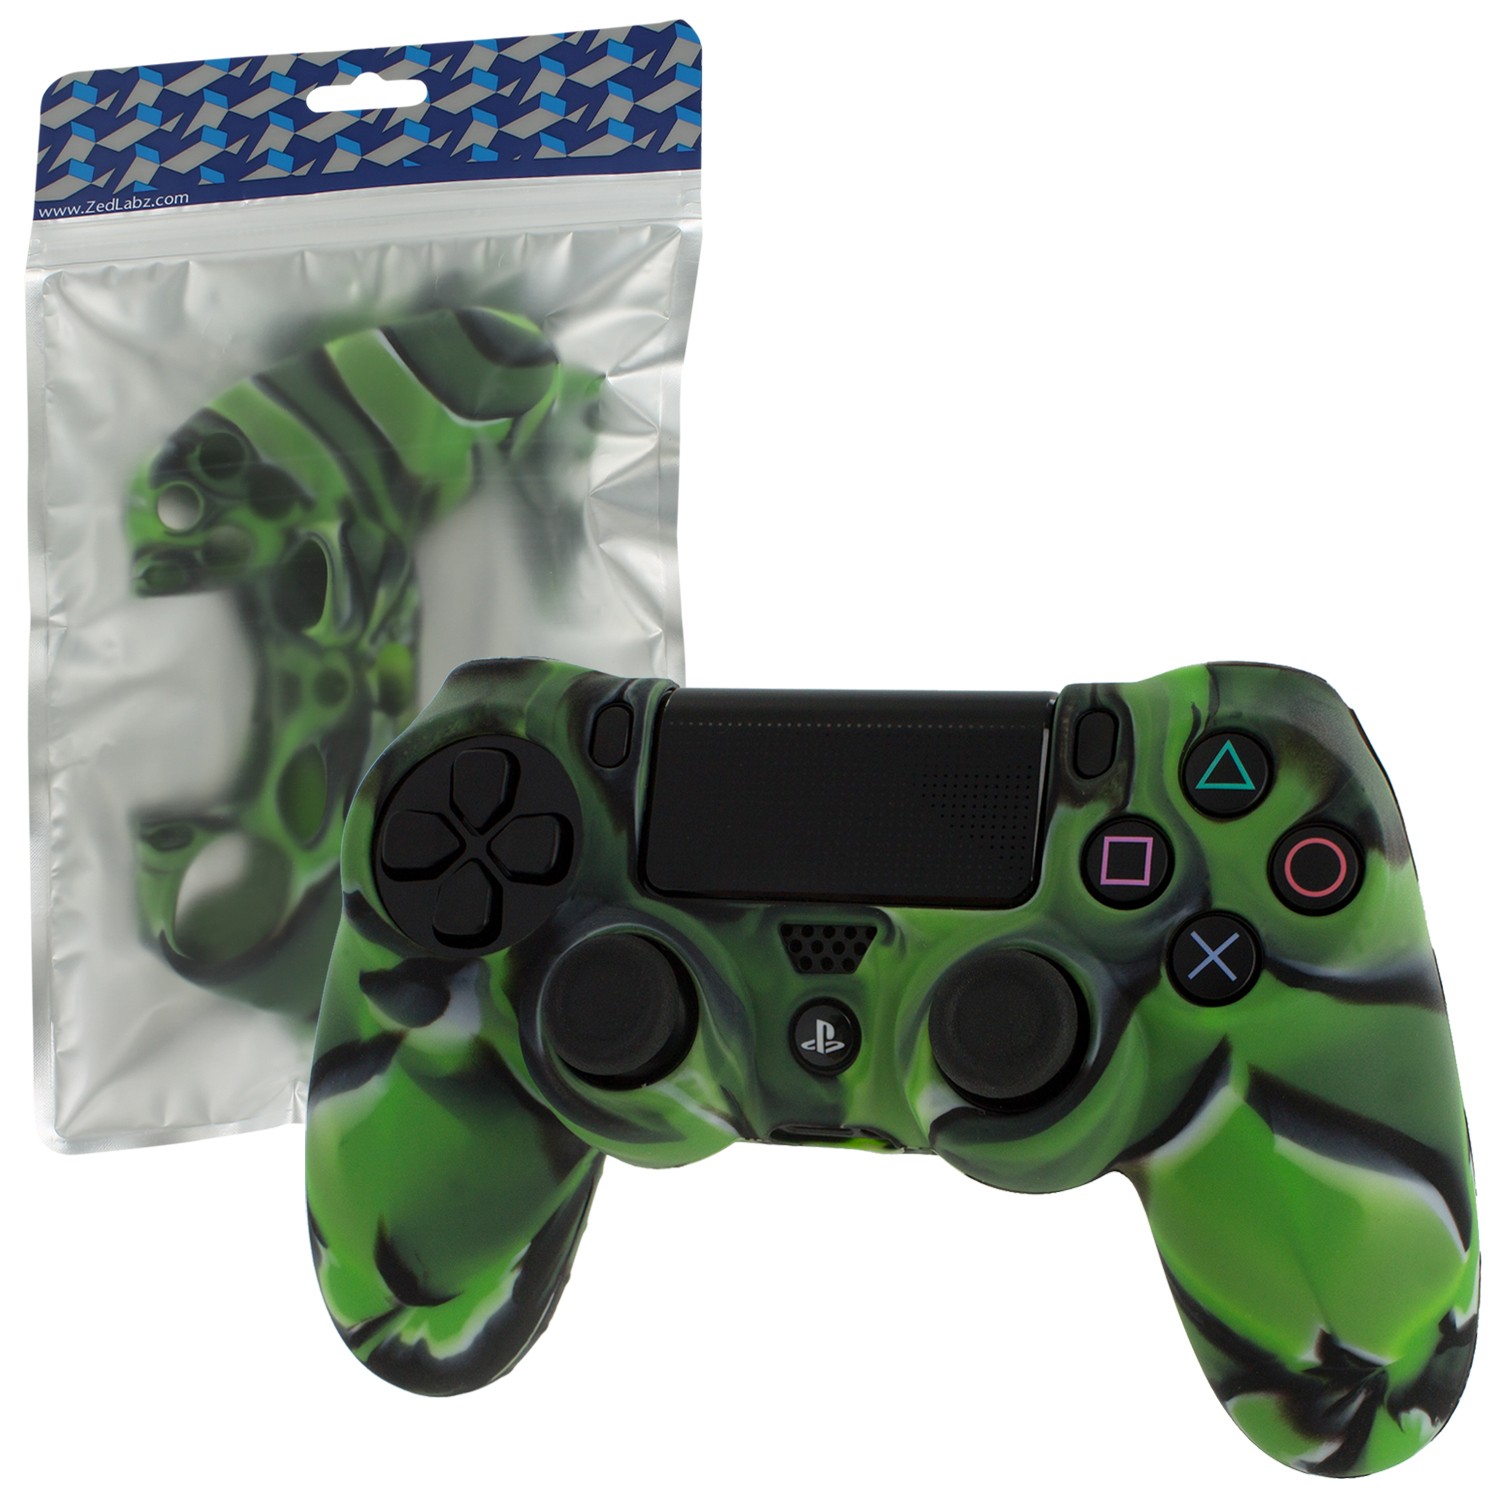 Kop Zedlabz Soft Silicone Rubber Skin Grip Cover For Sony Ps4 Controller With Ribbed Handle Camo Green